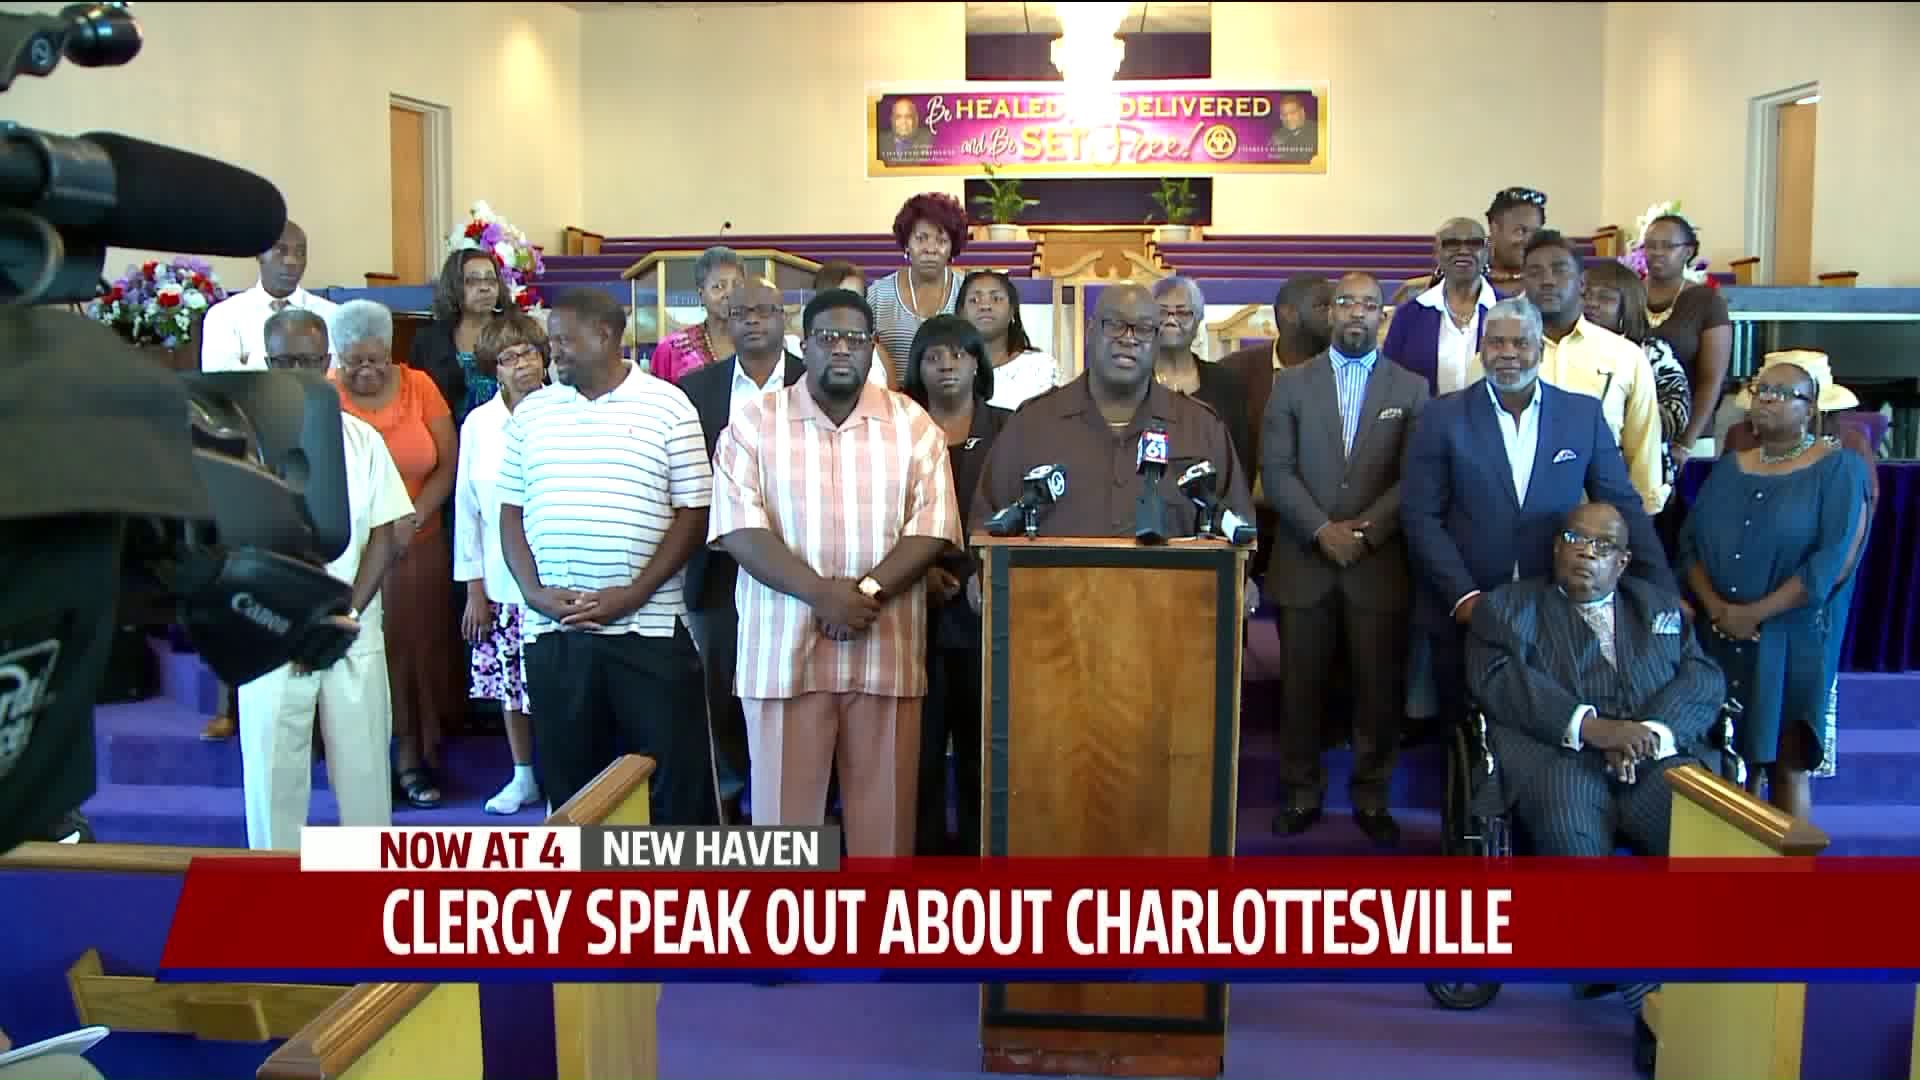 New Haven clergy speakout against racism